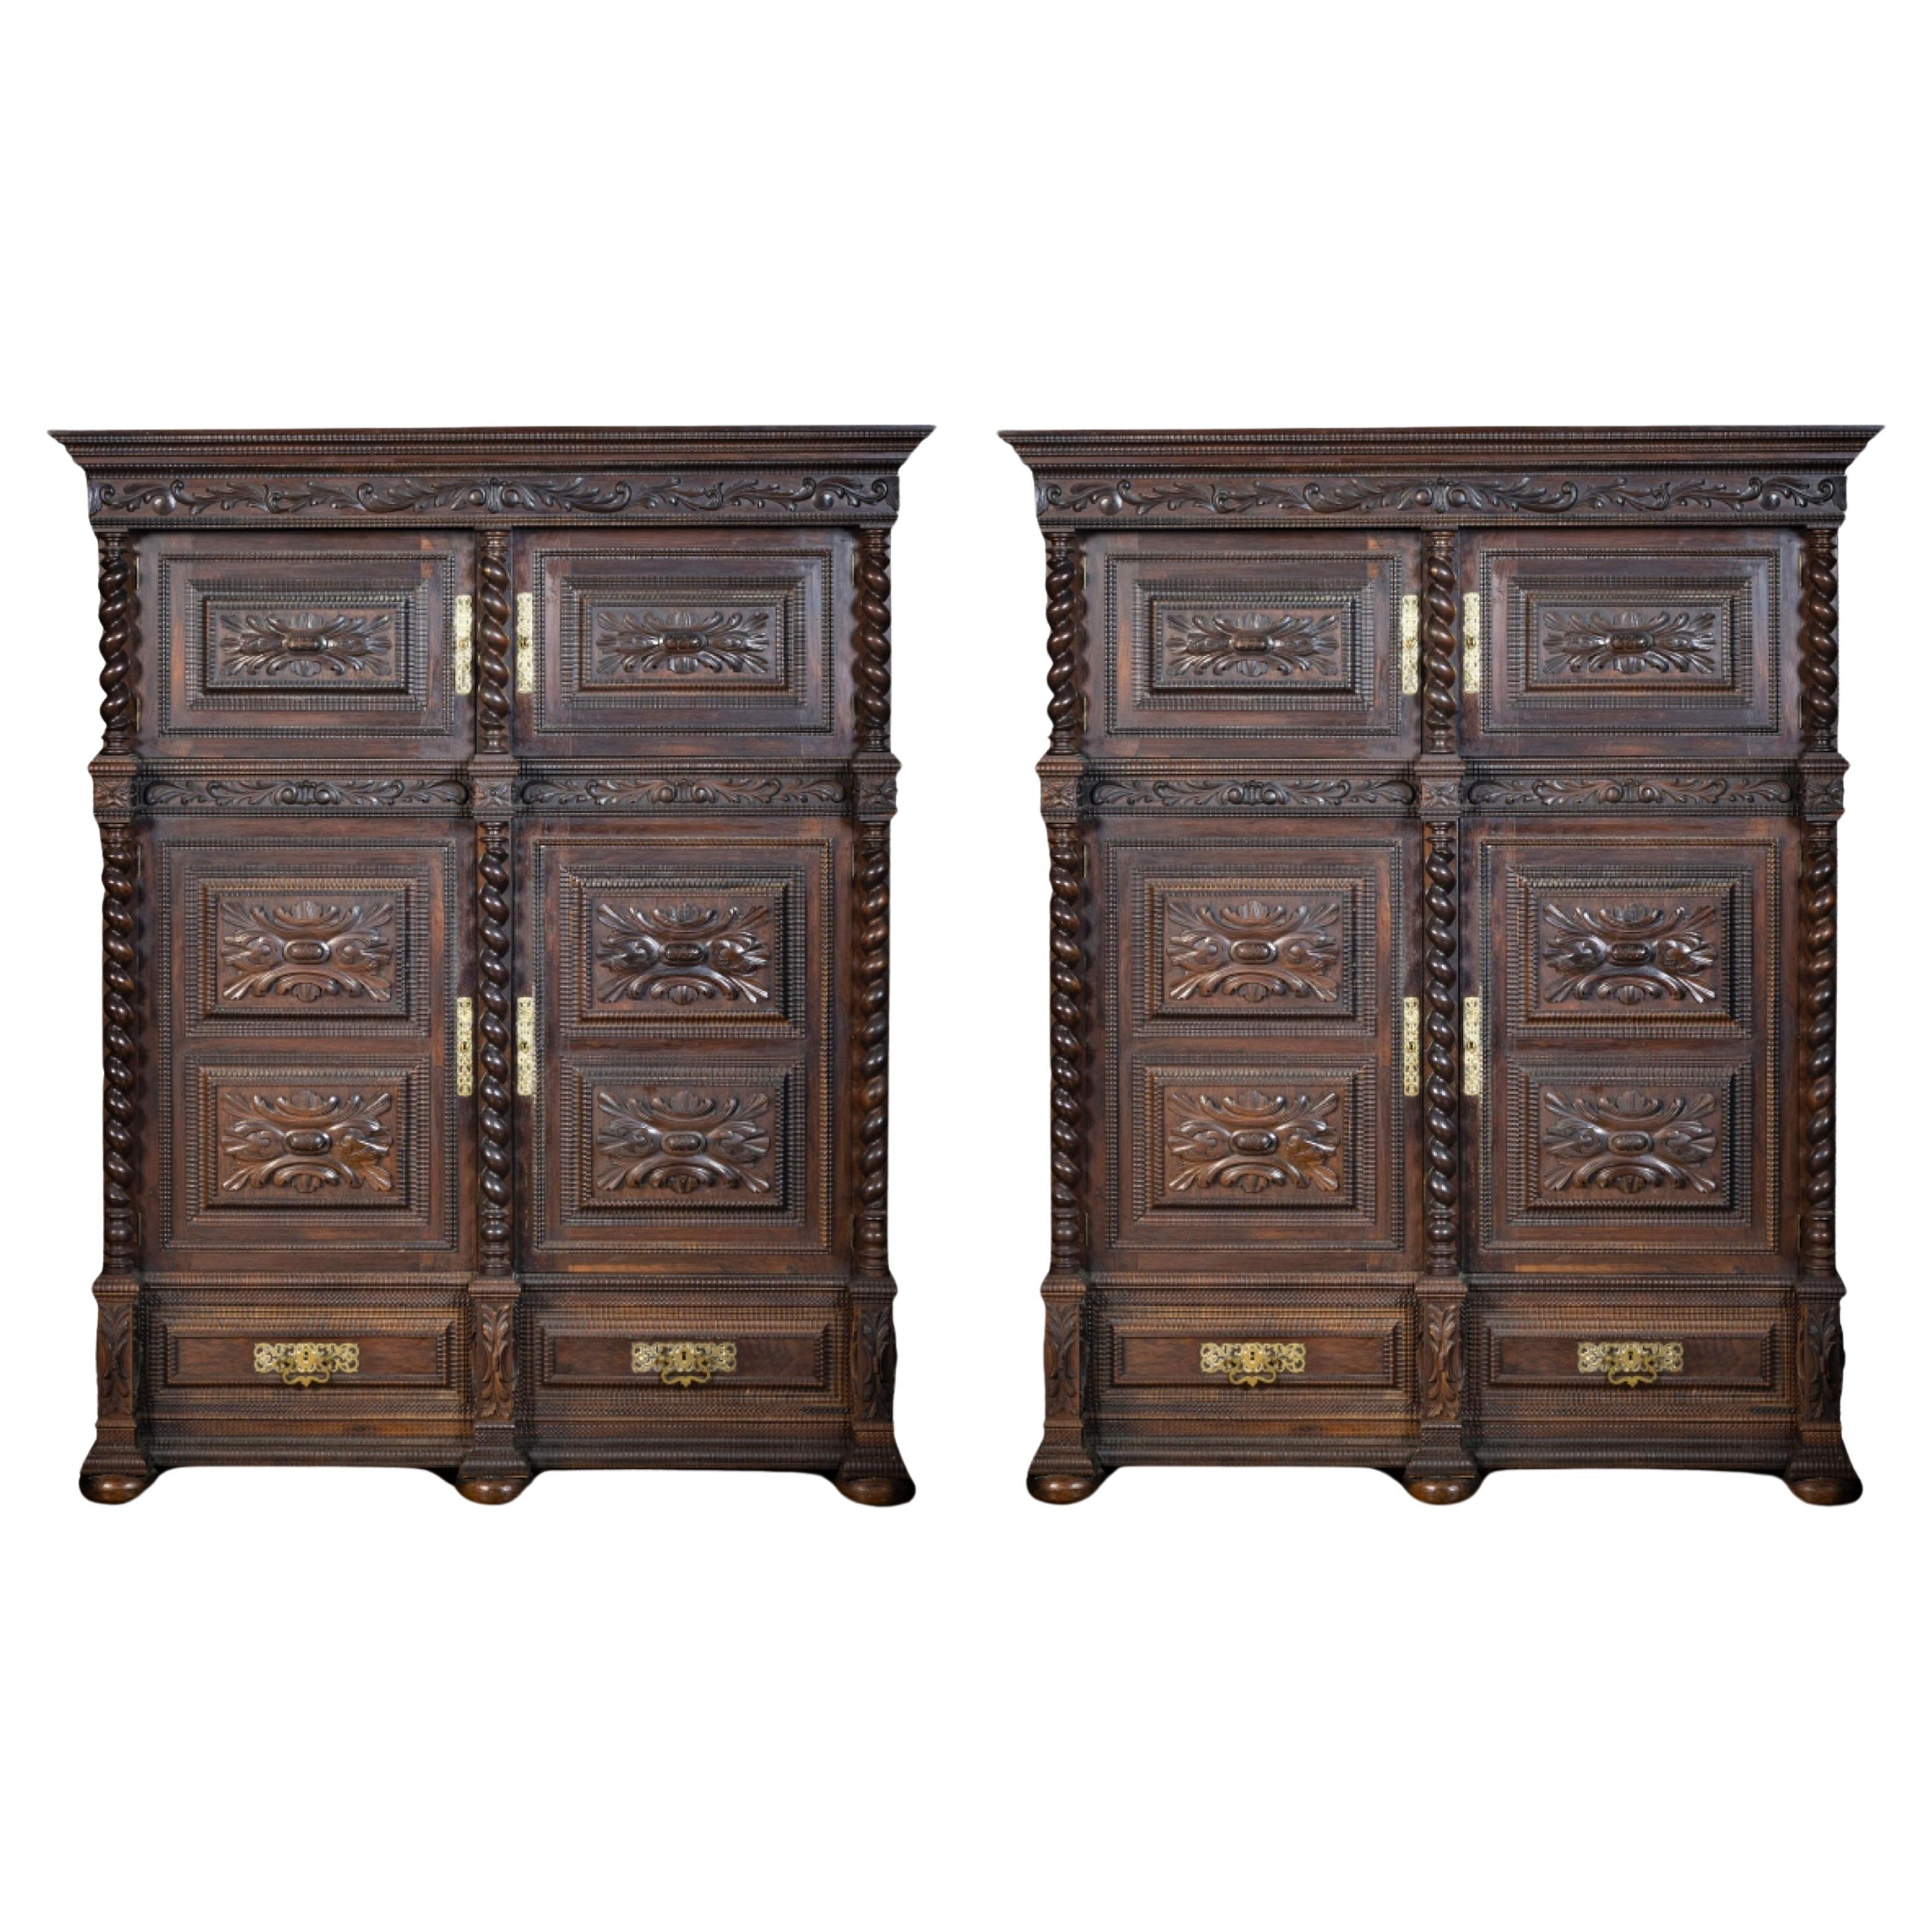 PAIR OF 19th Century PORTUGUESE CABINETS For Sale